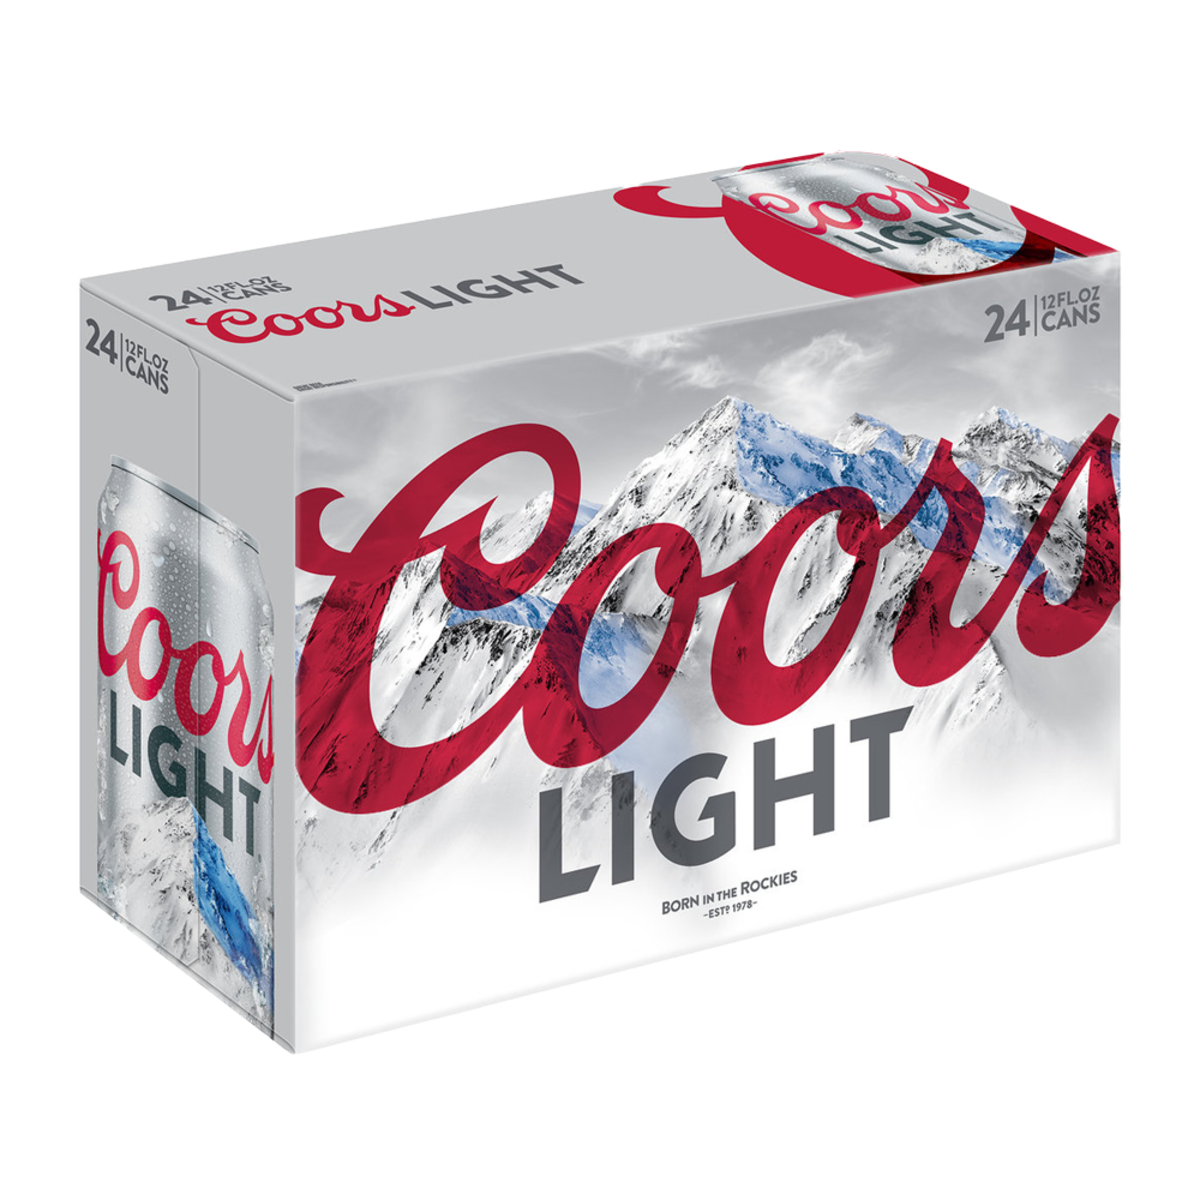 In 1978, Coors Light—a 4.2 light beer—was introduced by the Coors Brewing Company.